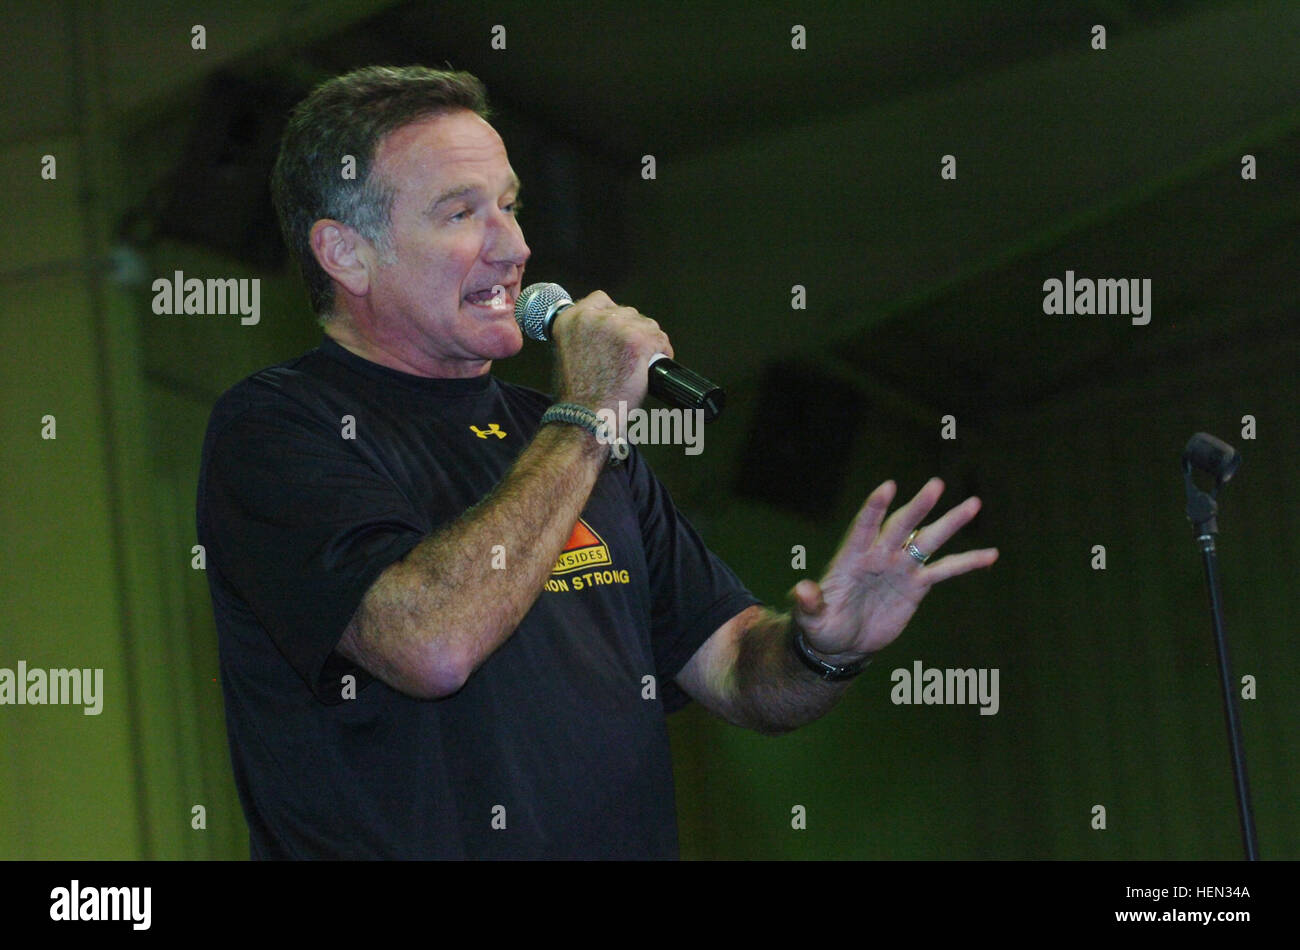 Robin Williams, Academy Award winning actor and comedian, entertains the troops at Contingency Operating Base Speicher main gym Dec. 19 The hour-long show at COB Speicher was one stop on a USO tour that also included singer Kid Rock, biker Lance Armstrong, 2007 Miss USA Rachel Smith and Grammy Award stand-up comedian Lewis Black. (Photo by Sgt. 1st Class Jeff Troth) Williams, Rock Stop at COB Speicher 69605 Stock Photo